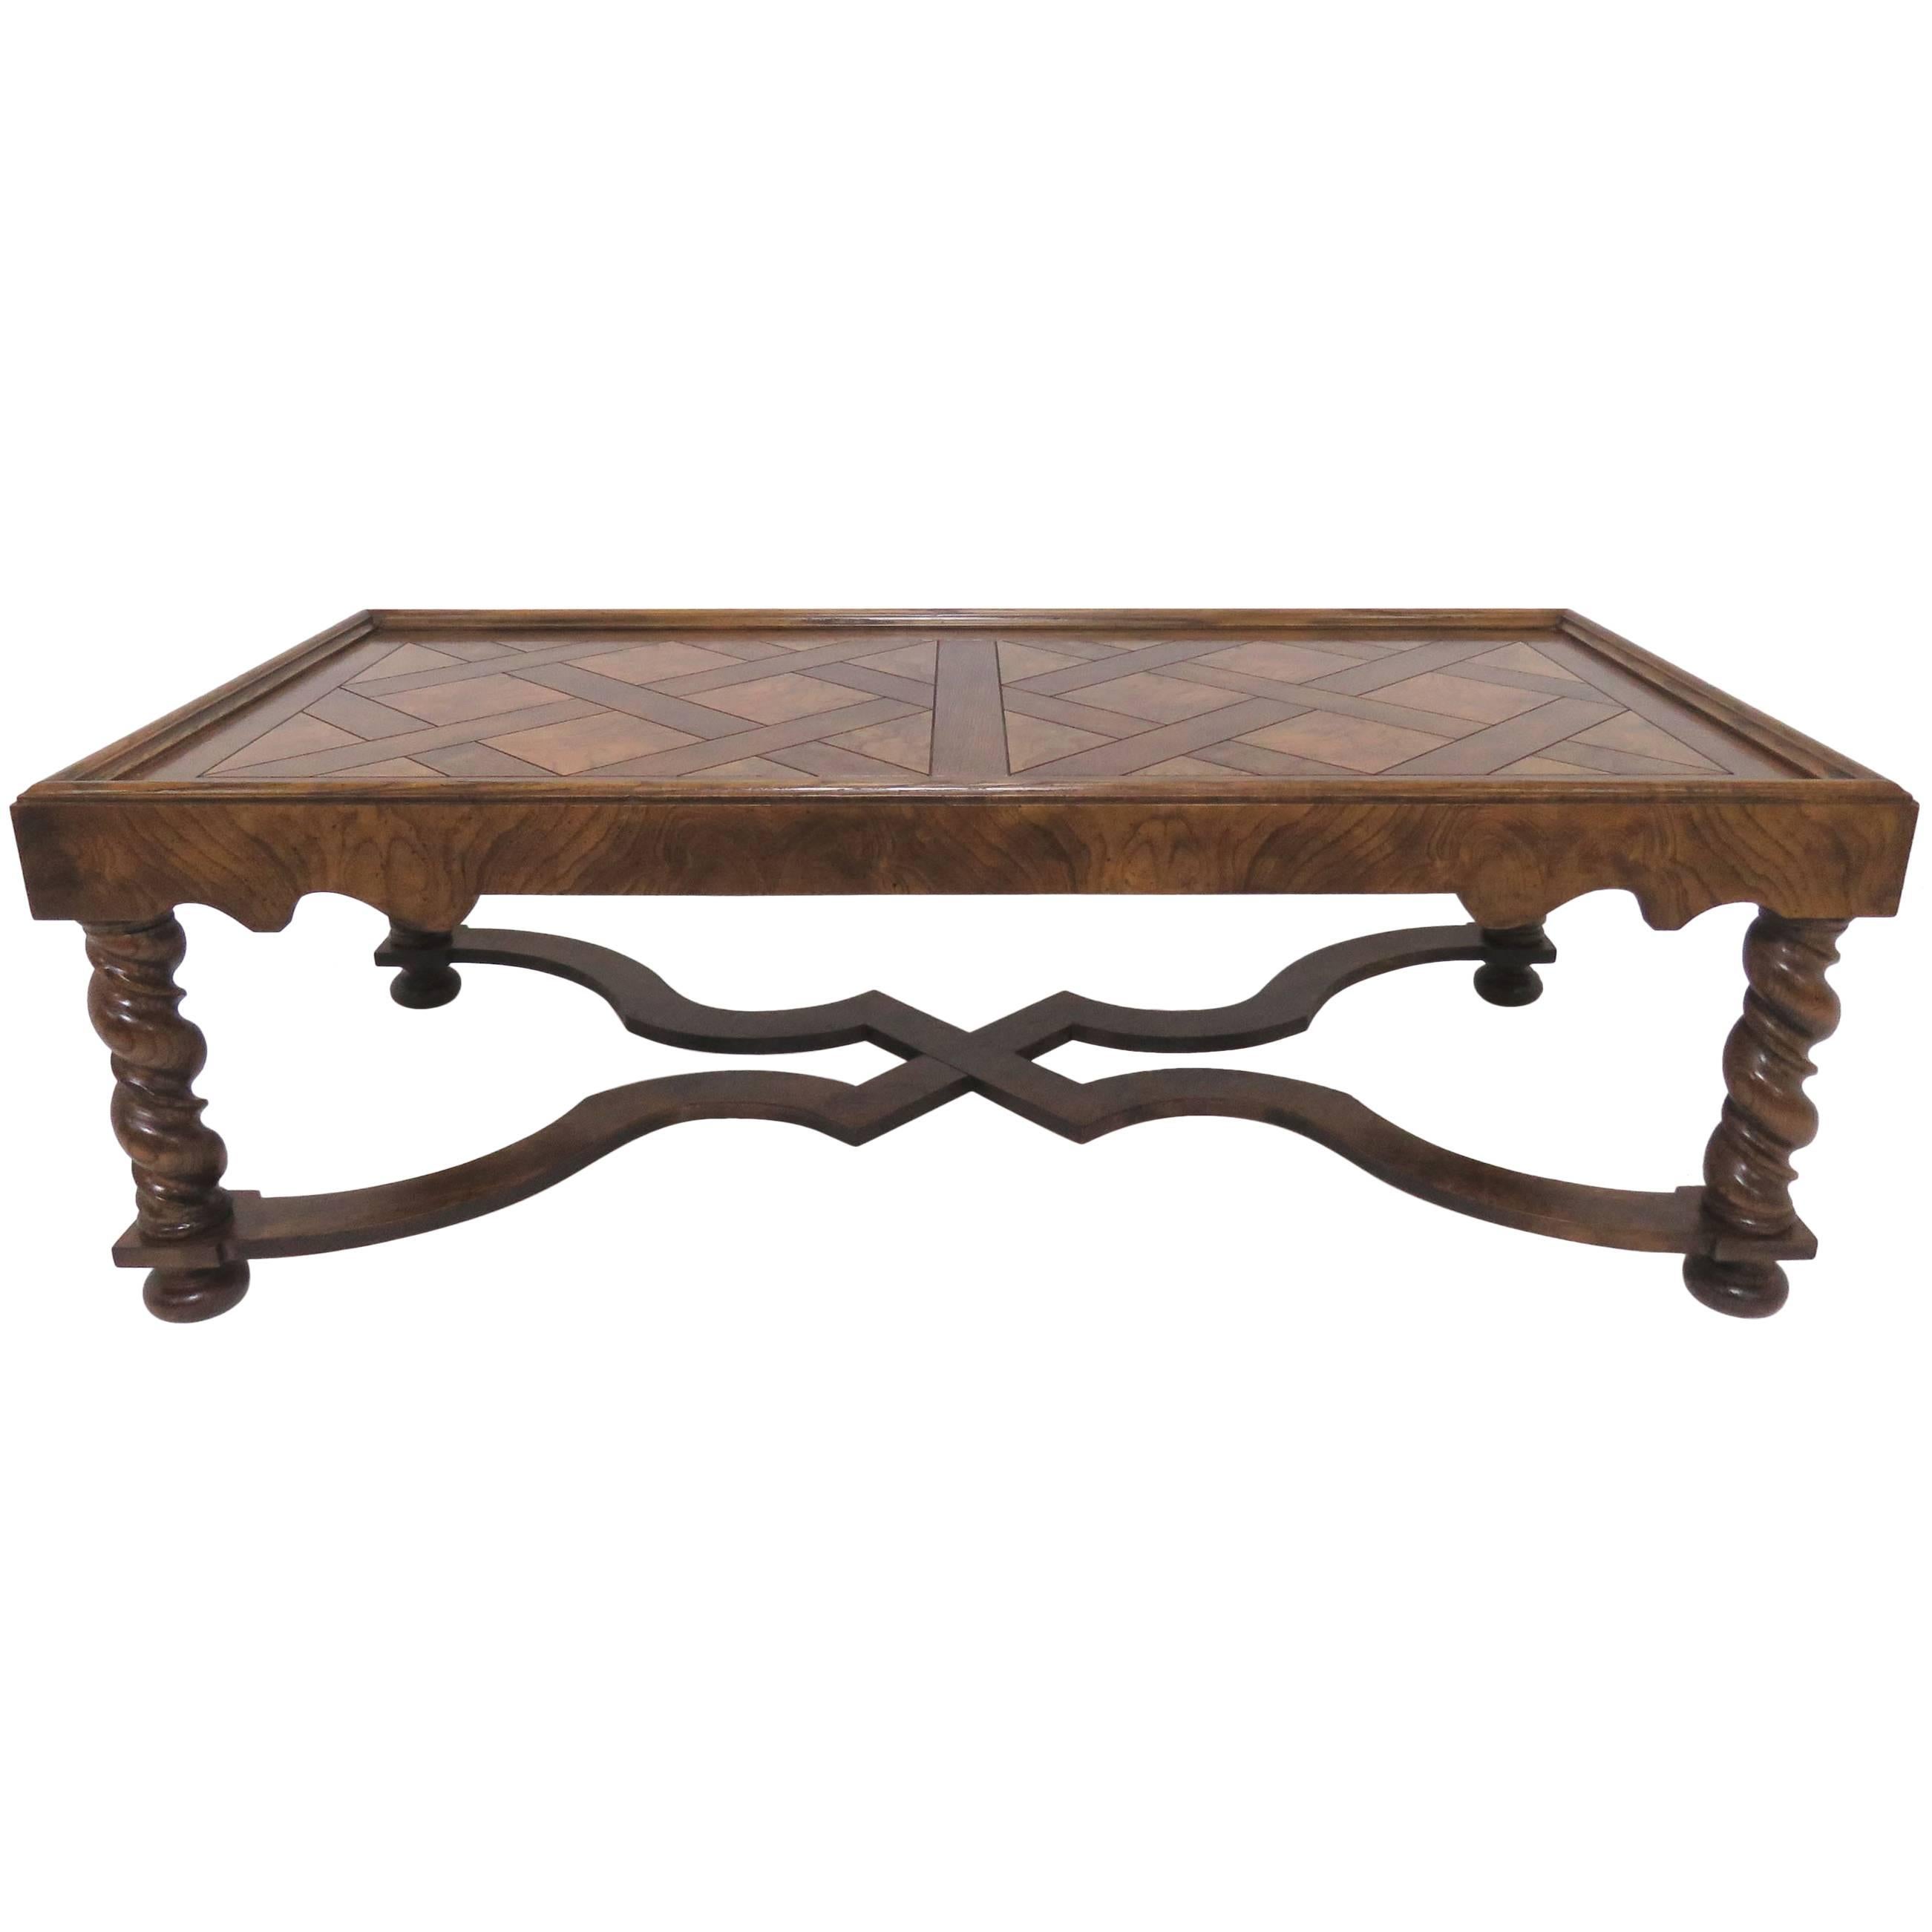 Baker Furniture French Country Coffee Table with Parquetry Top and Carved Legs